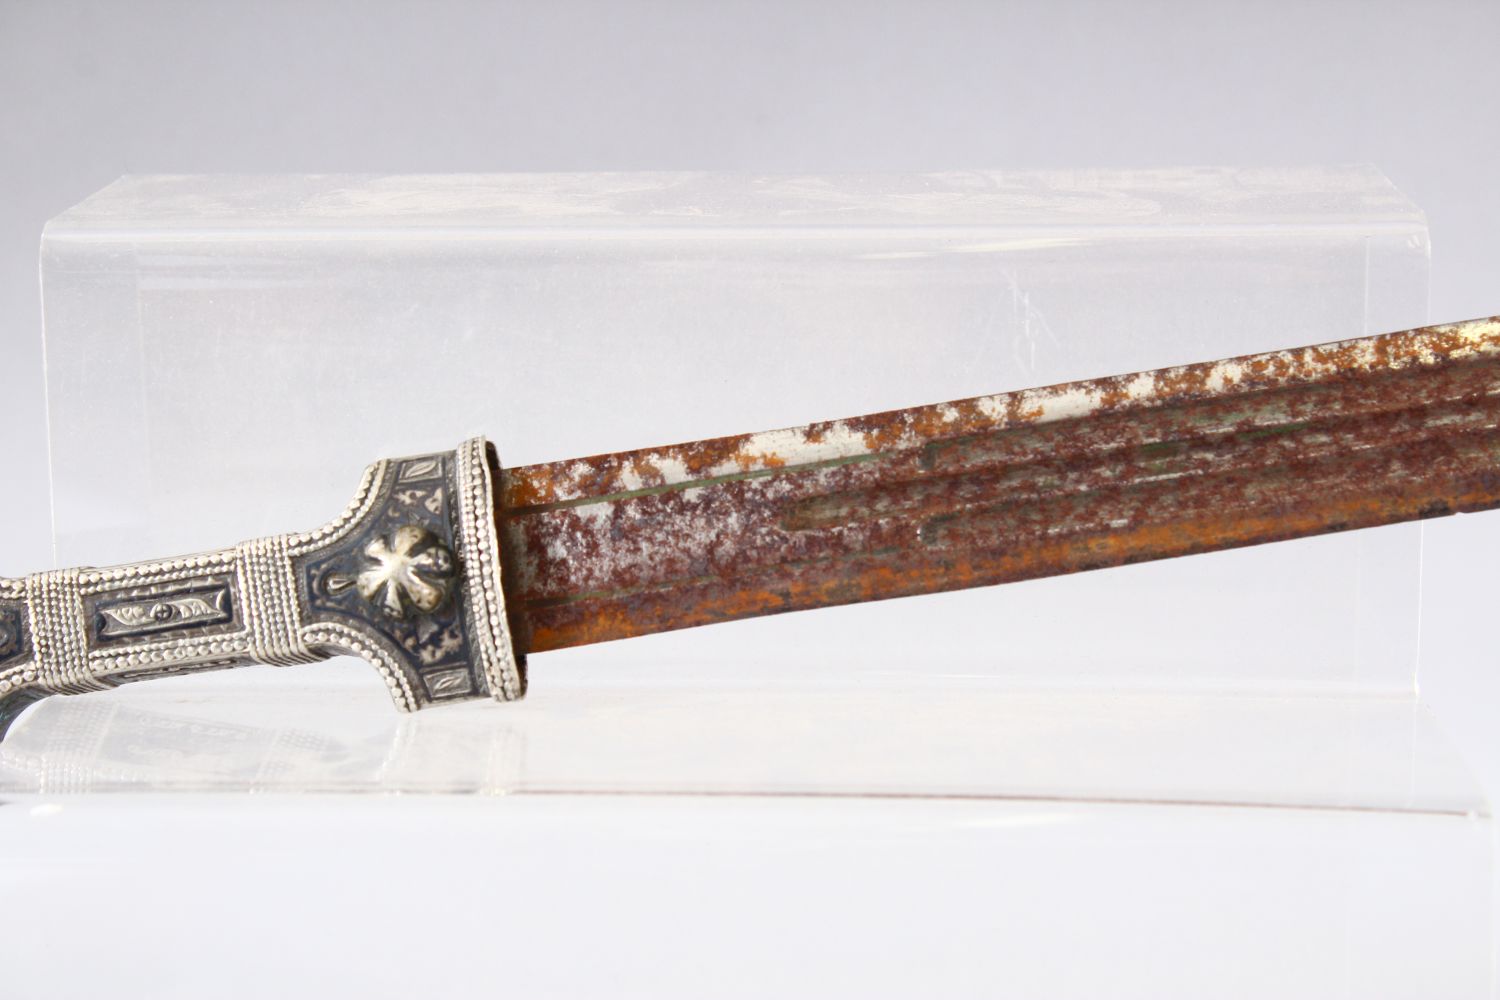 A 19TH CENTURY KINDJAL DAGGER and scabbard, 47.5cm long. - Image 7 of 8